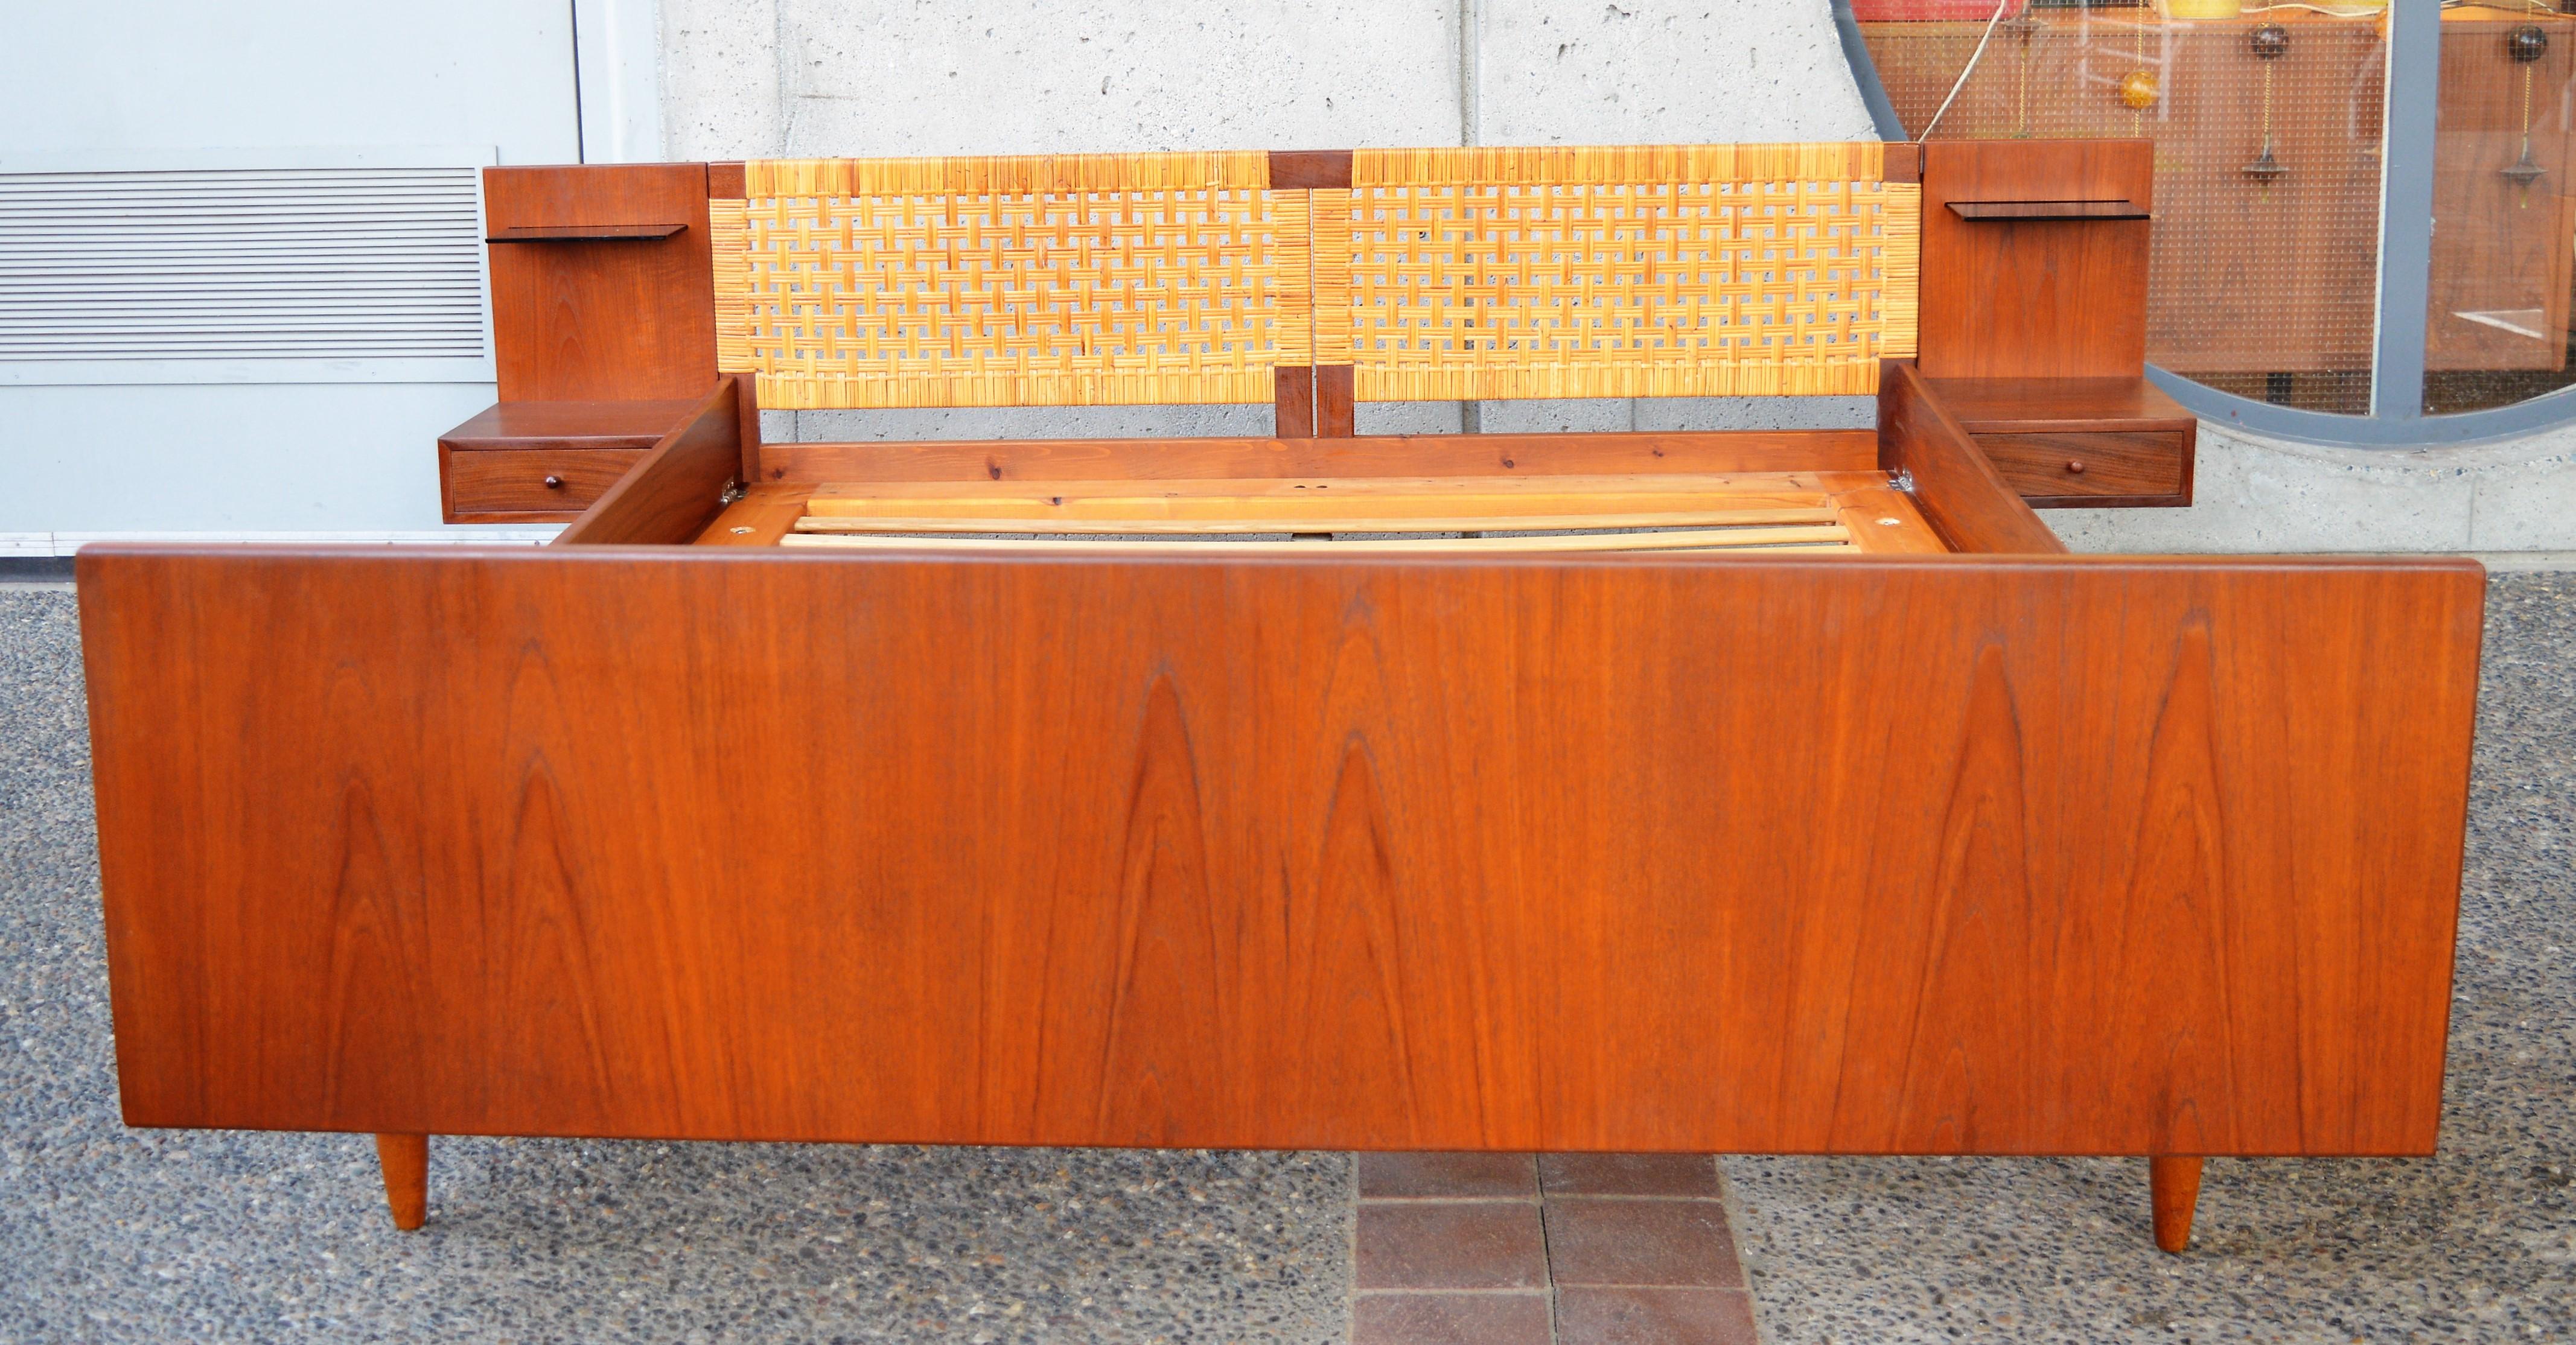 This rare and impeccable Danish modern teak top quality all wood platform bed was designed by Hans Wegner for GETAMA in the 1950s. Featuring a beautifully caned headboard with a pair of floating side tables with one drawer with dovetail joints and a